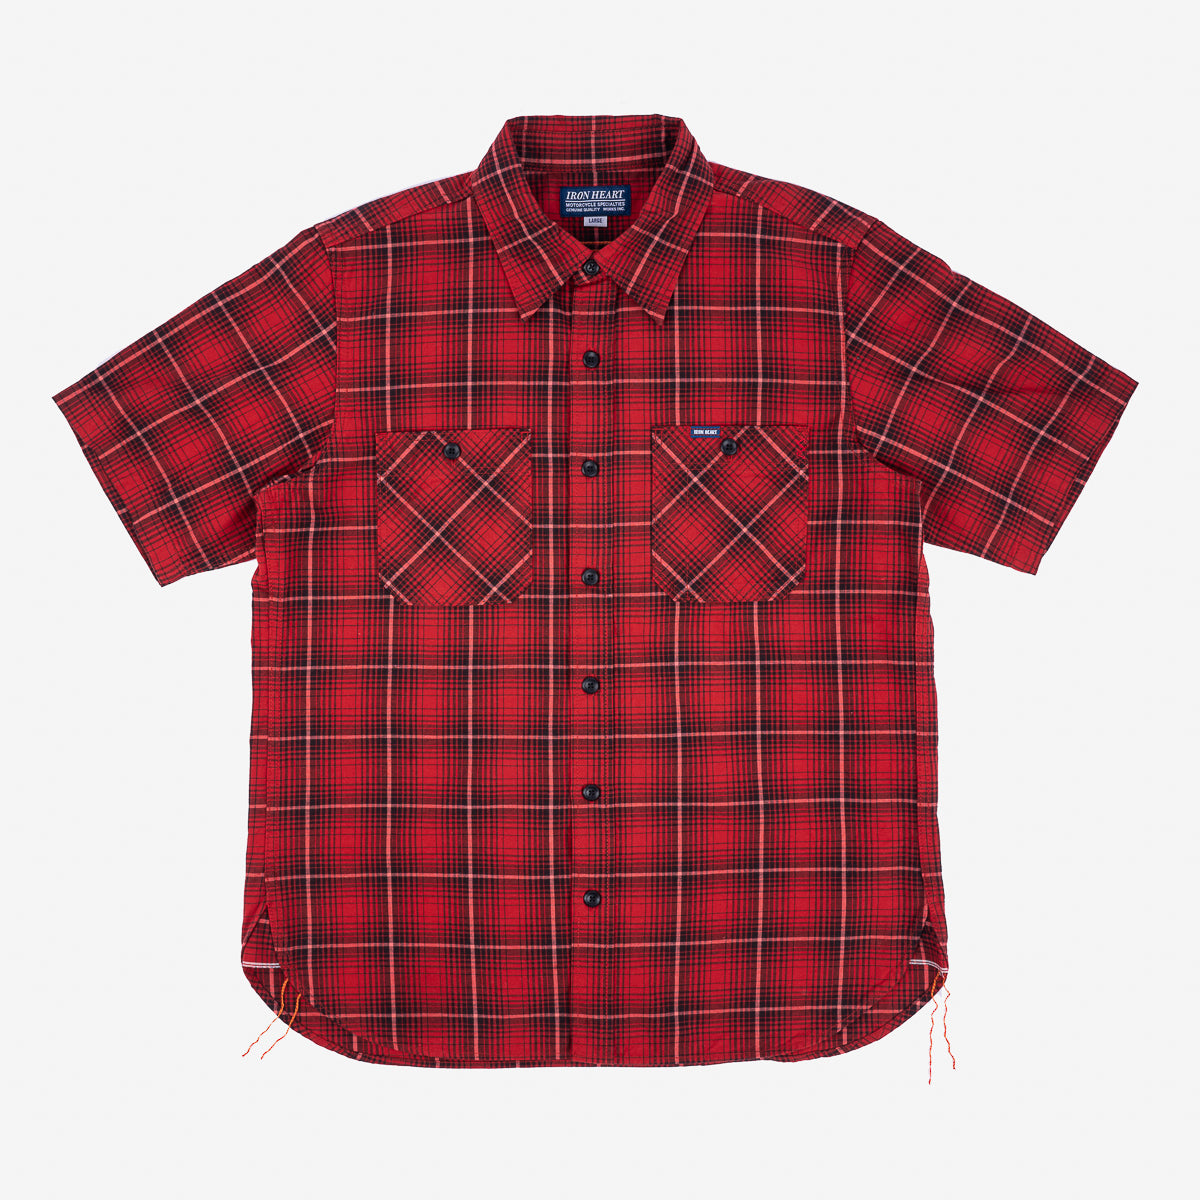 IHSH-392-RED - 5oz Selvedge Short Sleeved Work Shirt - Red Vintage Check